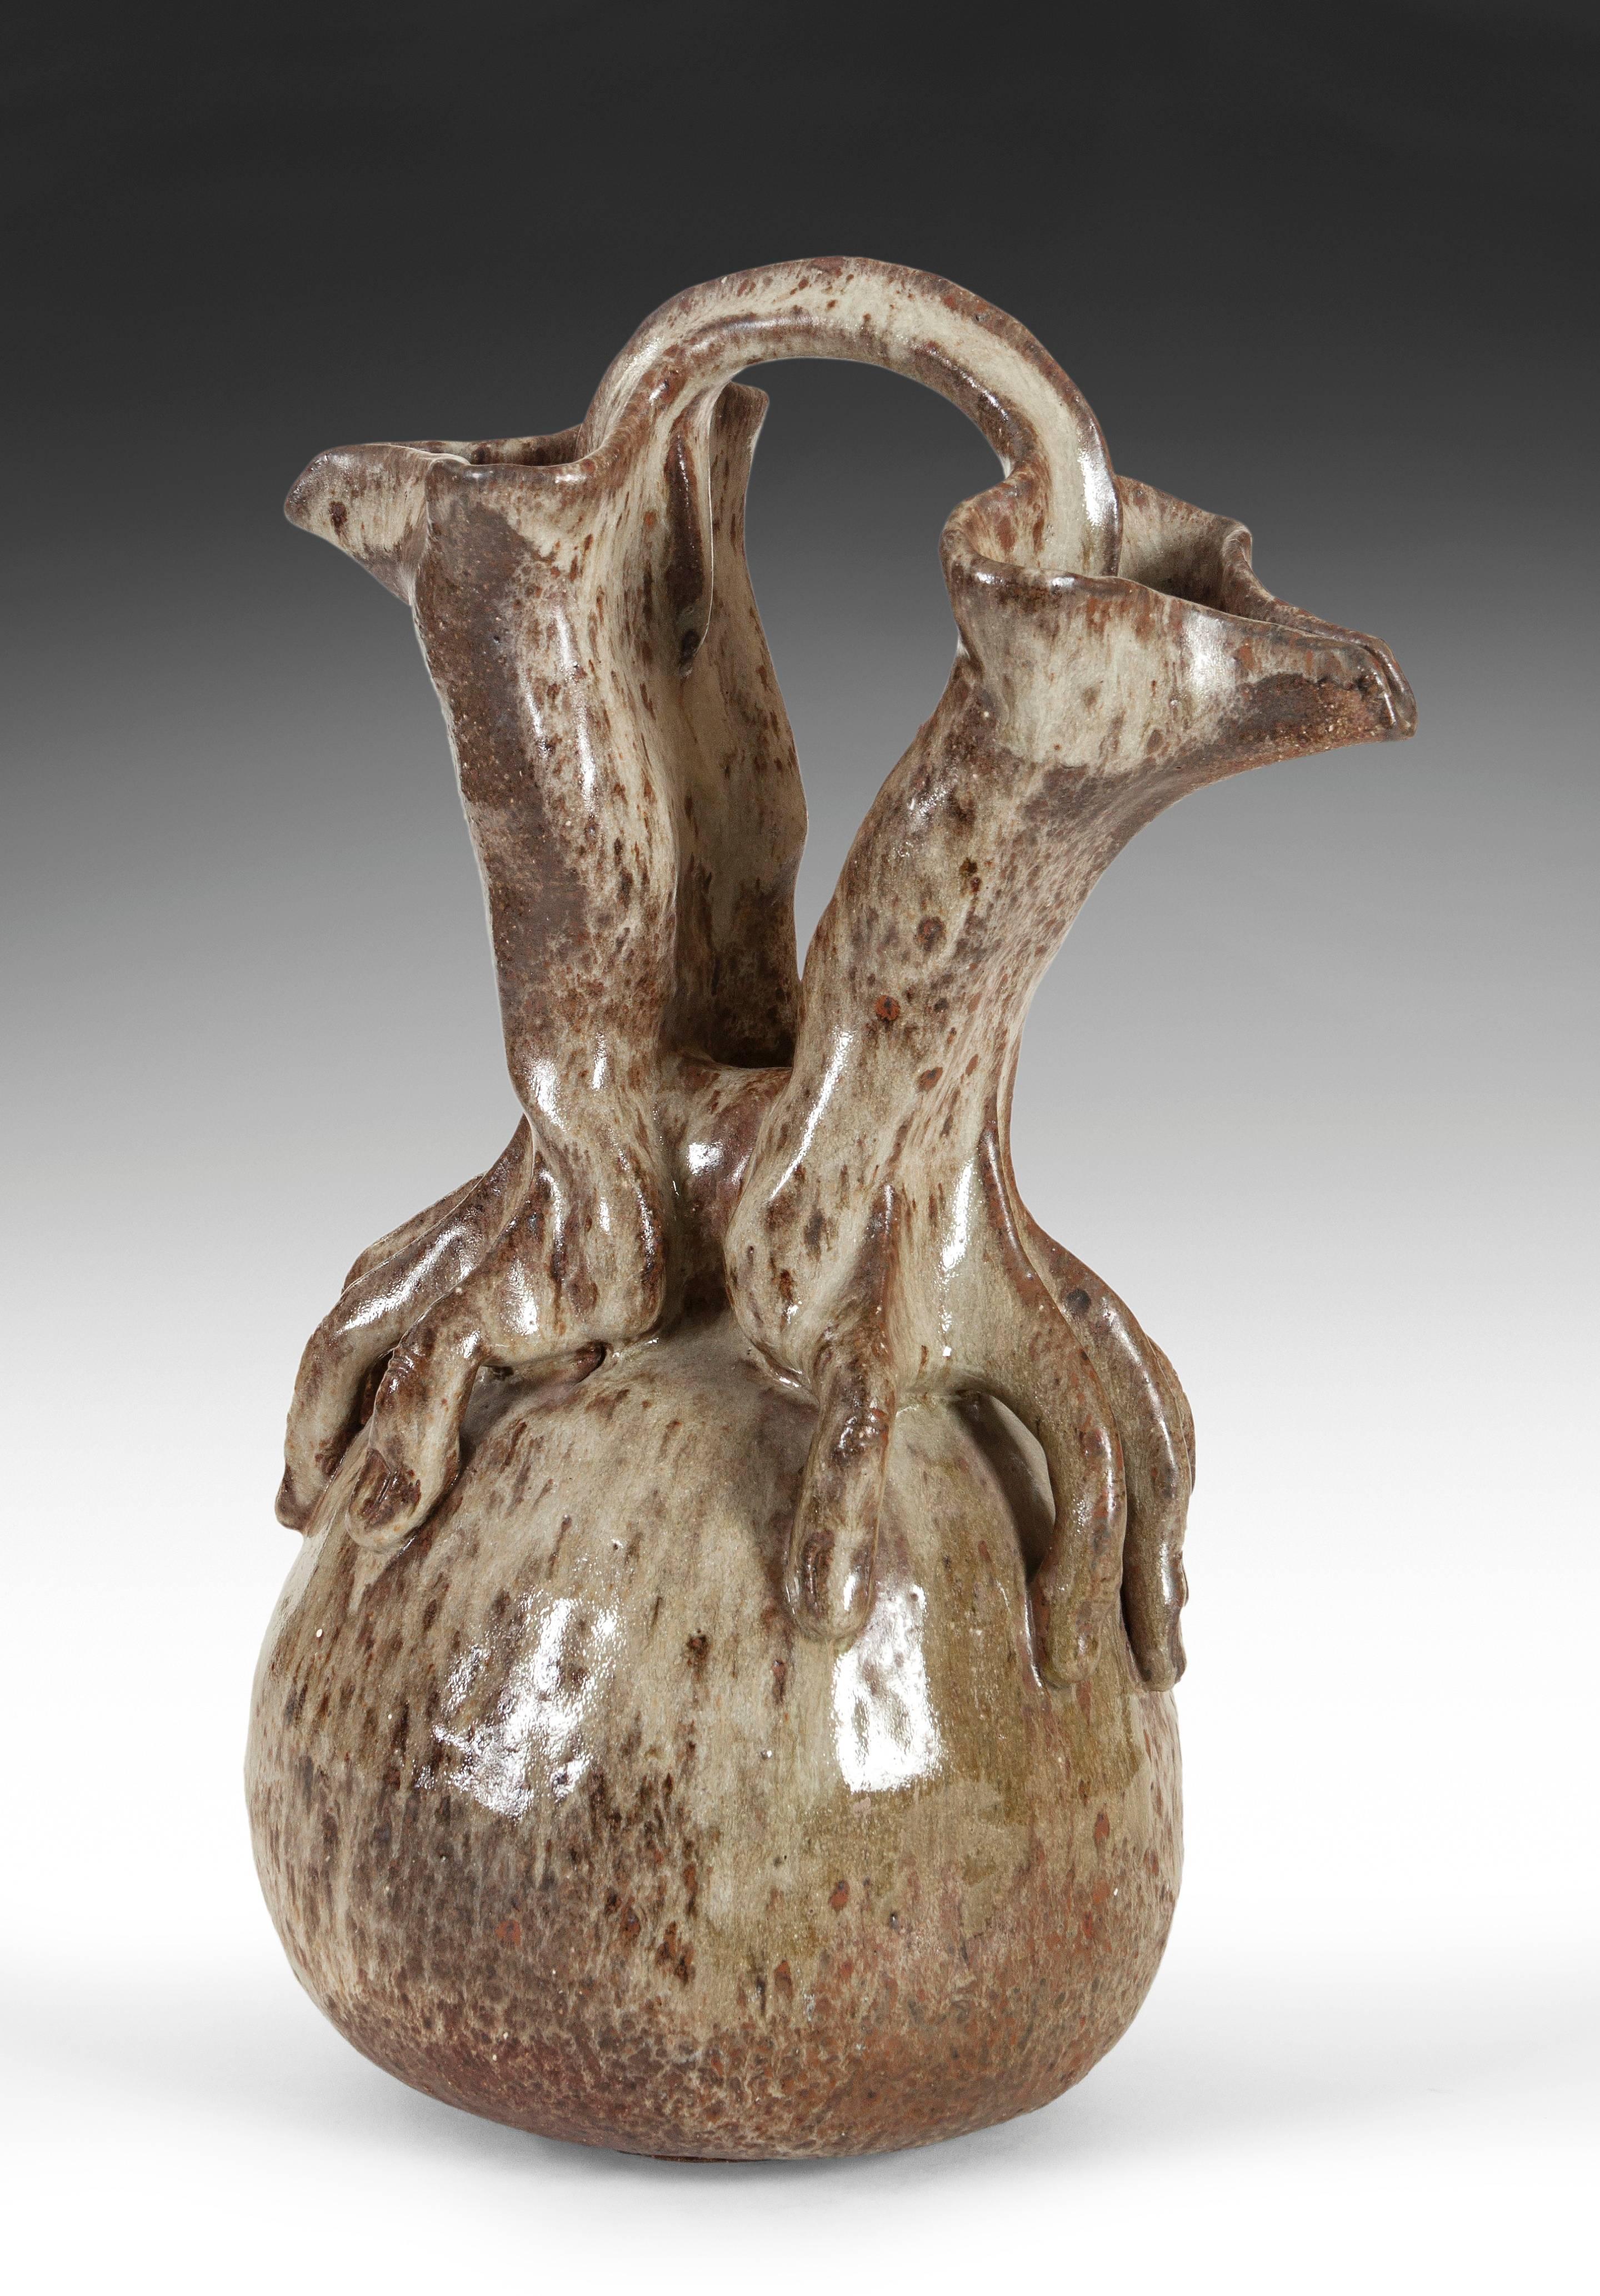 The surreal composition expertly executed and handsomely glazed. The two hands placed atop a rounded-form, each arm terminating in a folded spout joined to a sinuous handle. Illegibly signed on the base.